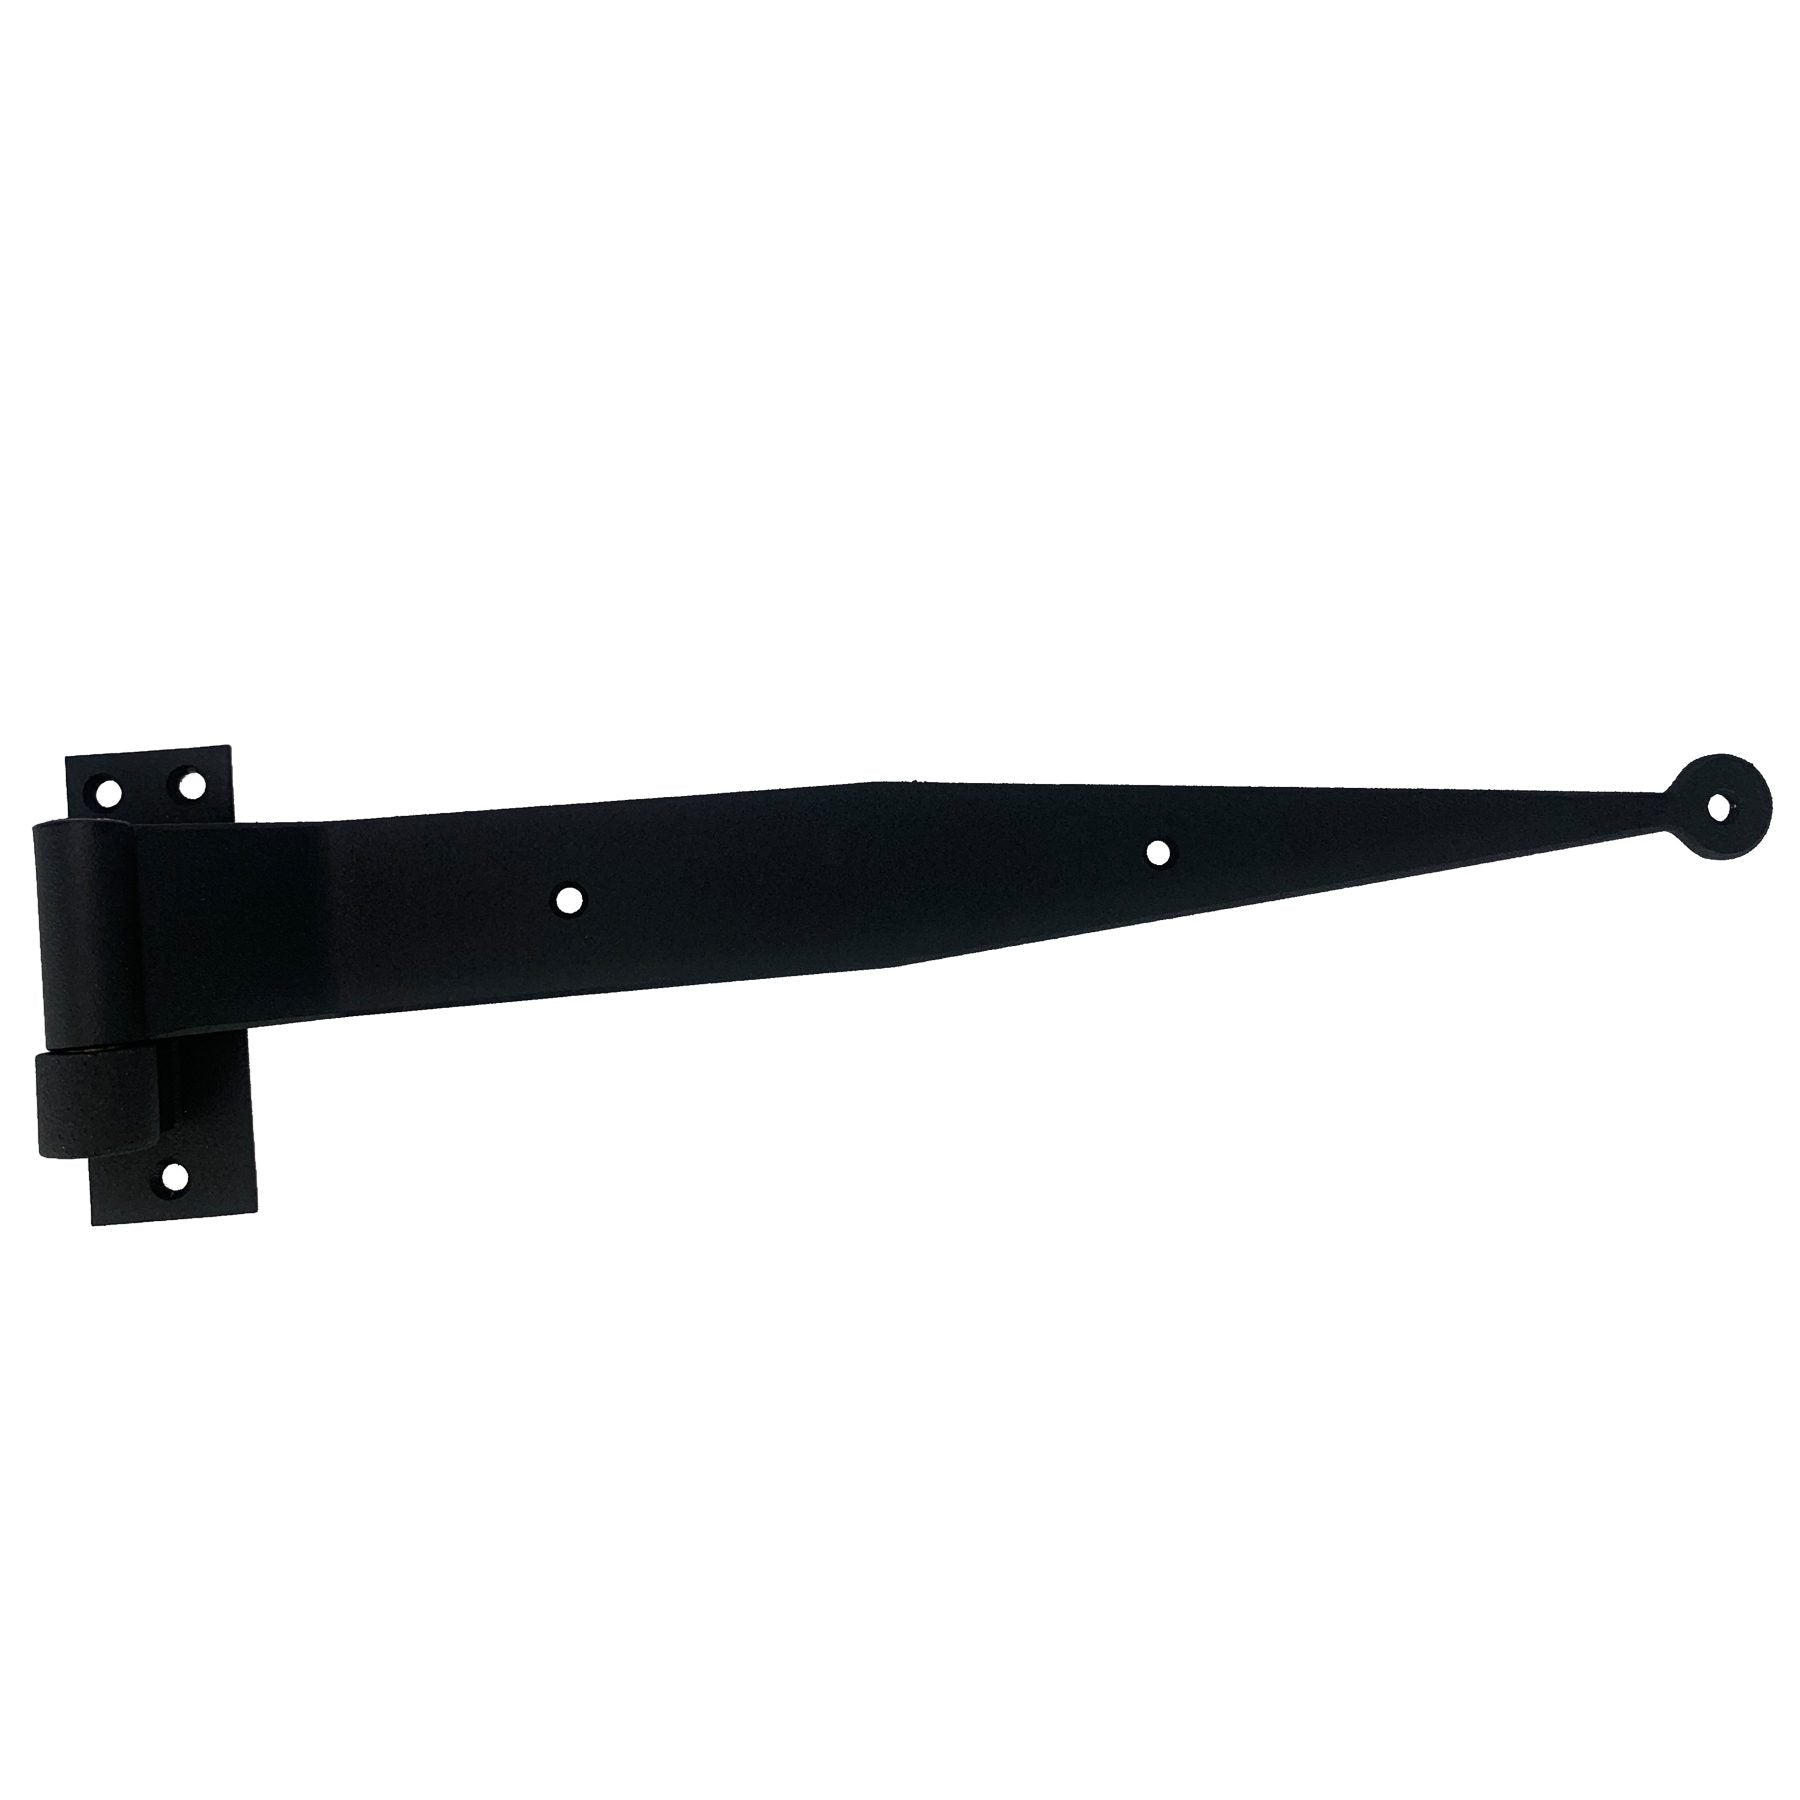 Strap hinge for shutters - stainless steel - 12 inch